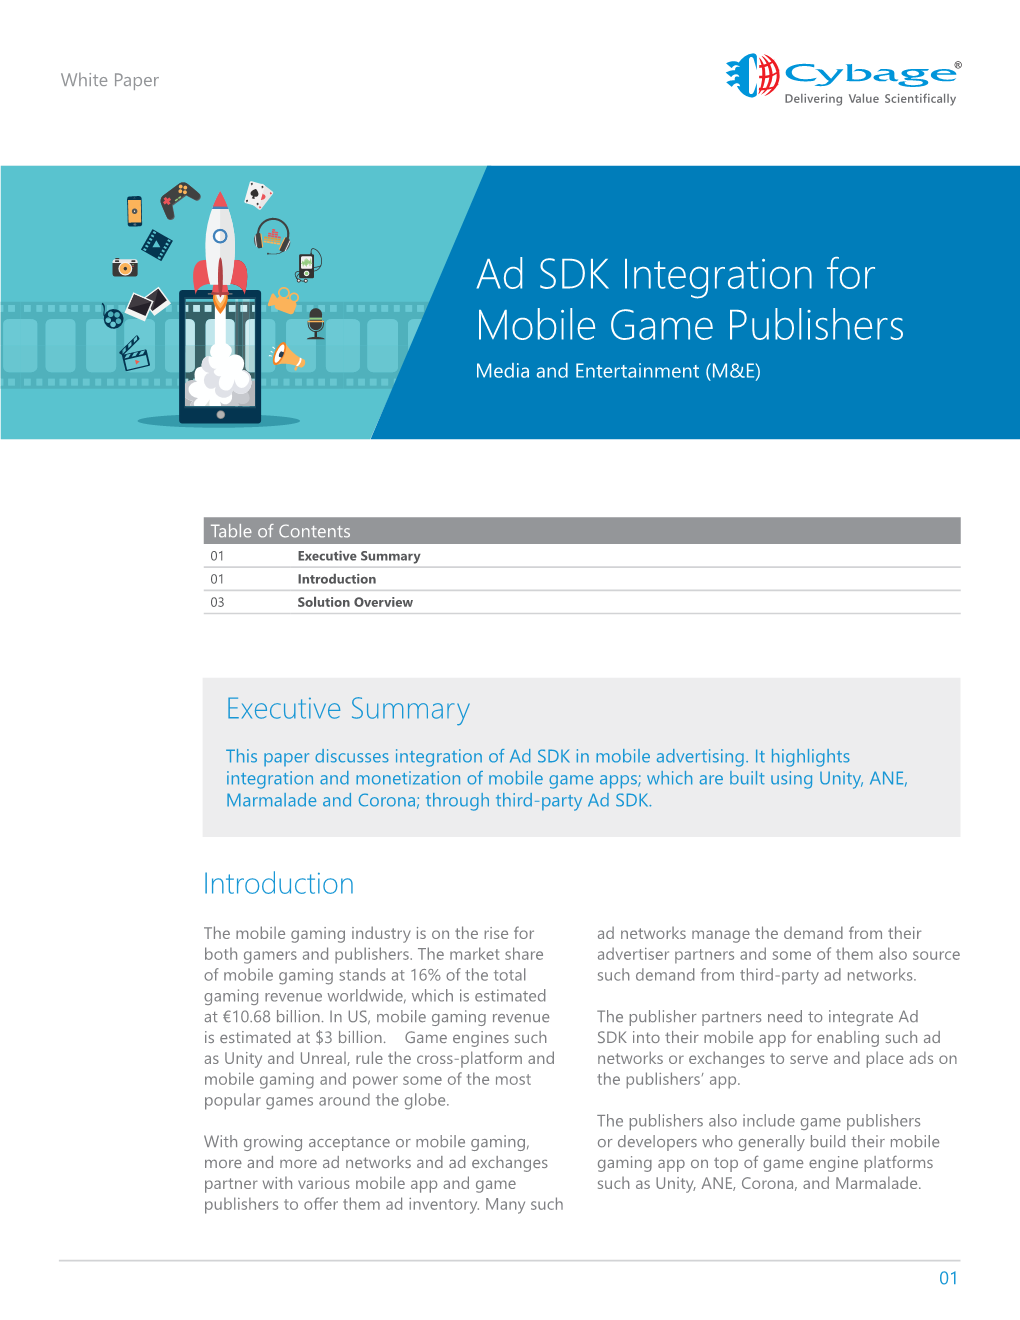 Ad SDK Integration for Mobile Game Publishers Media and Entertainment (M&E)